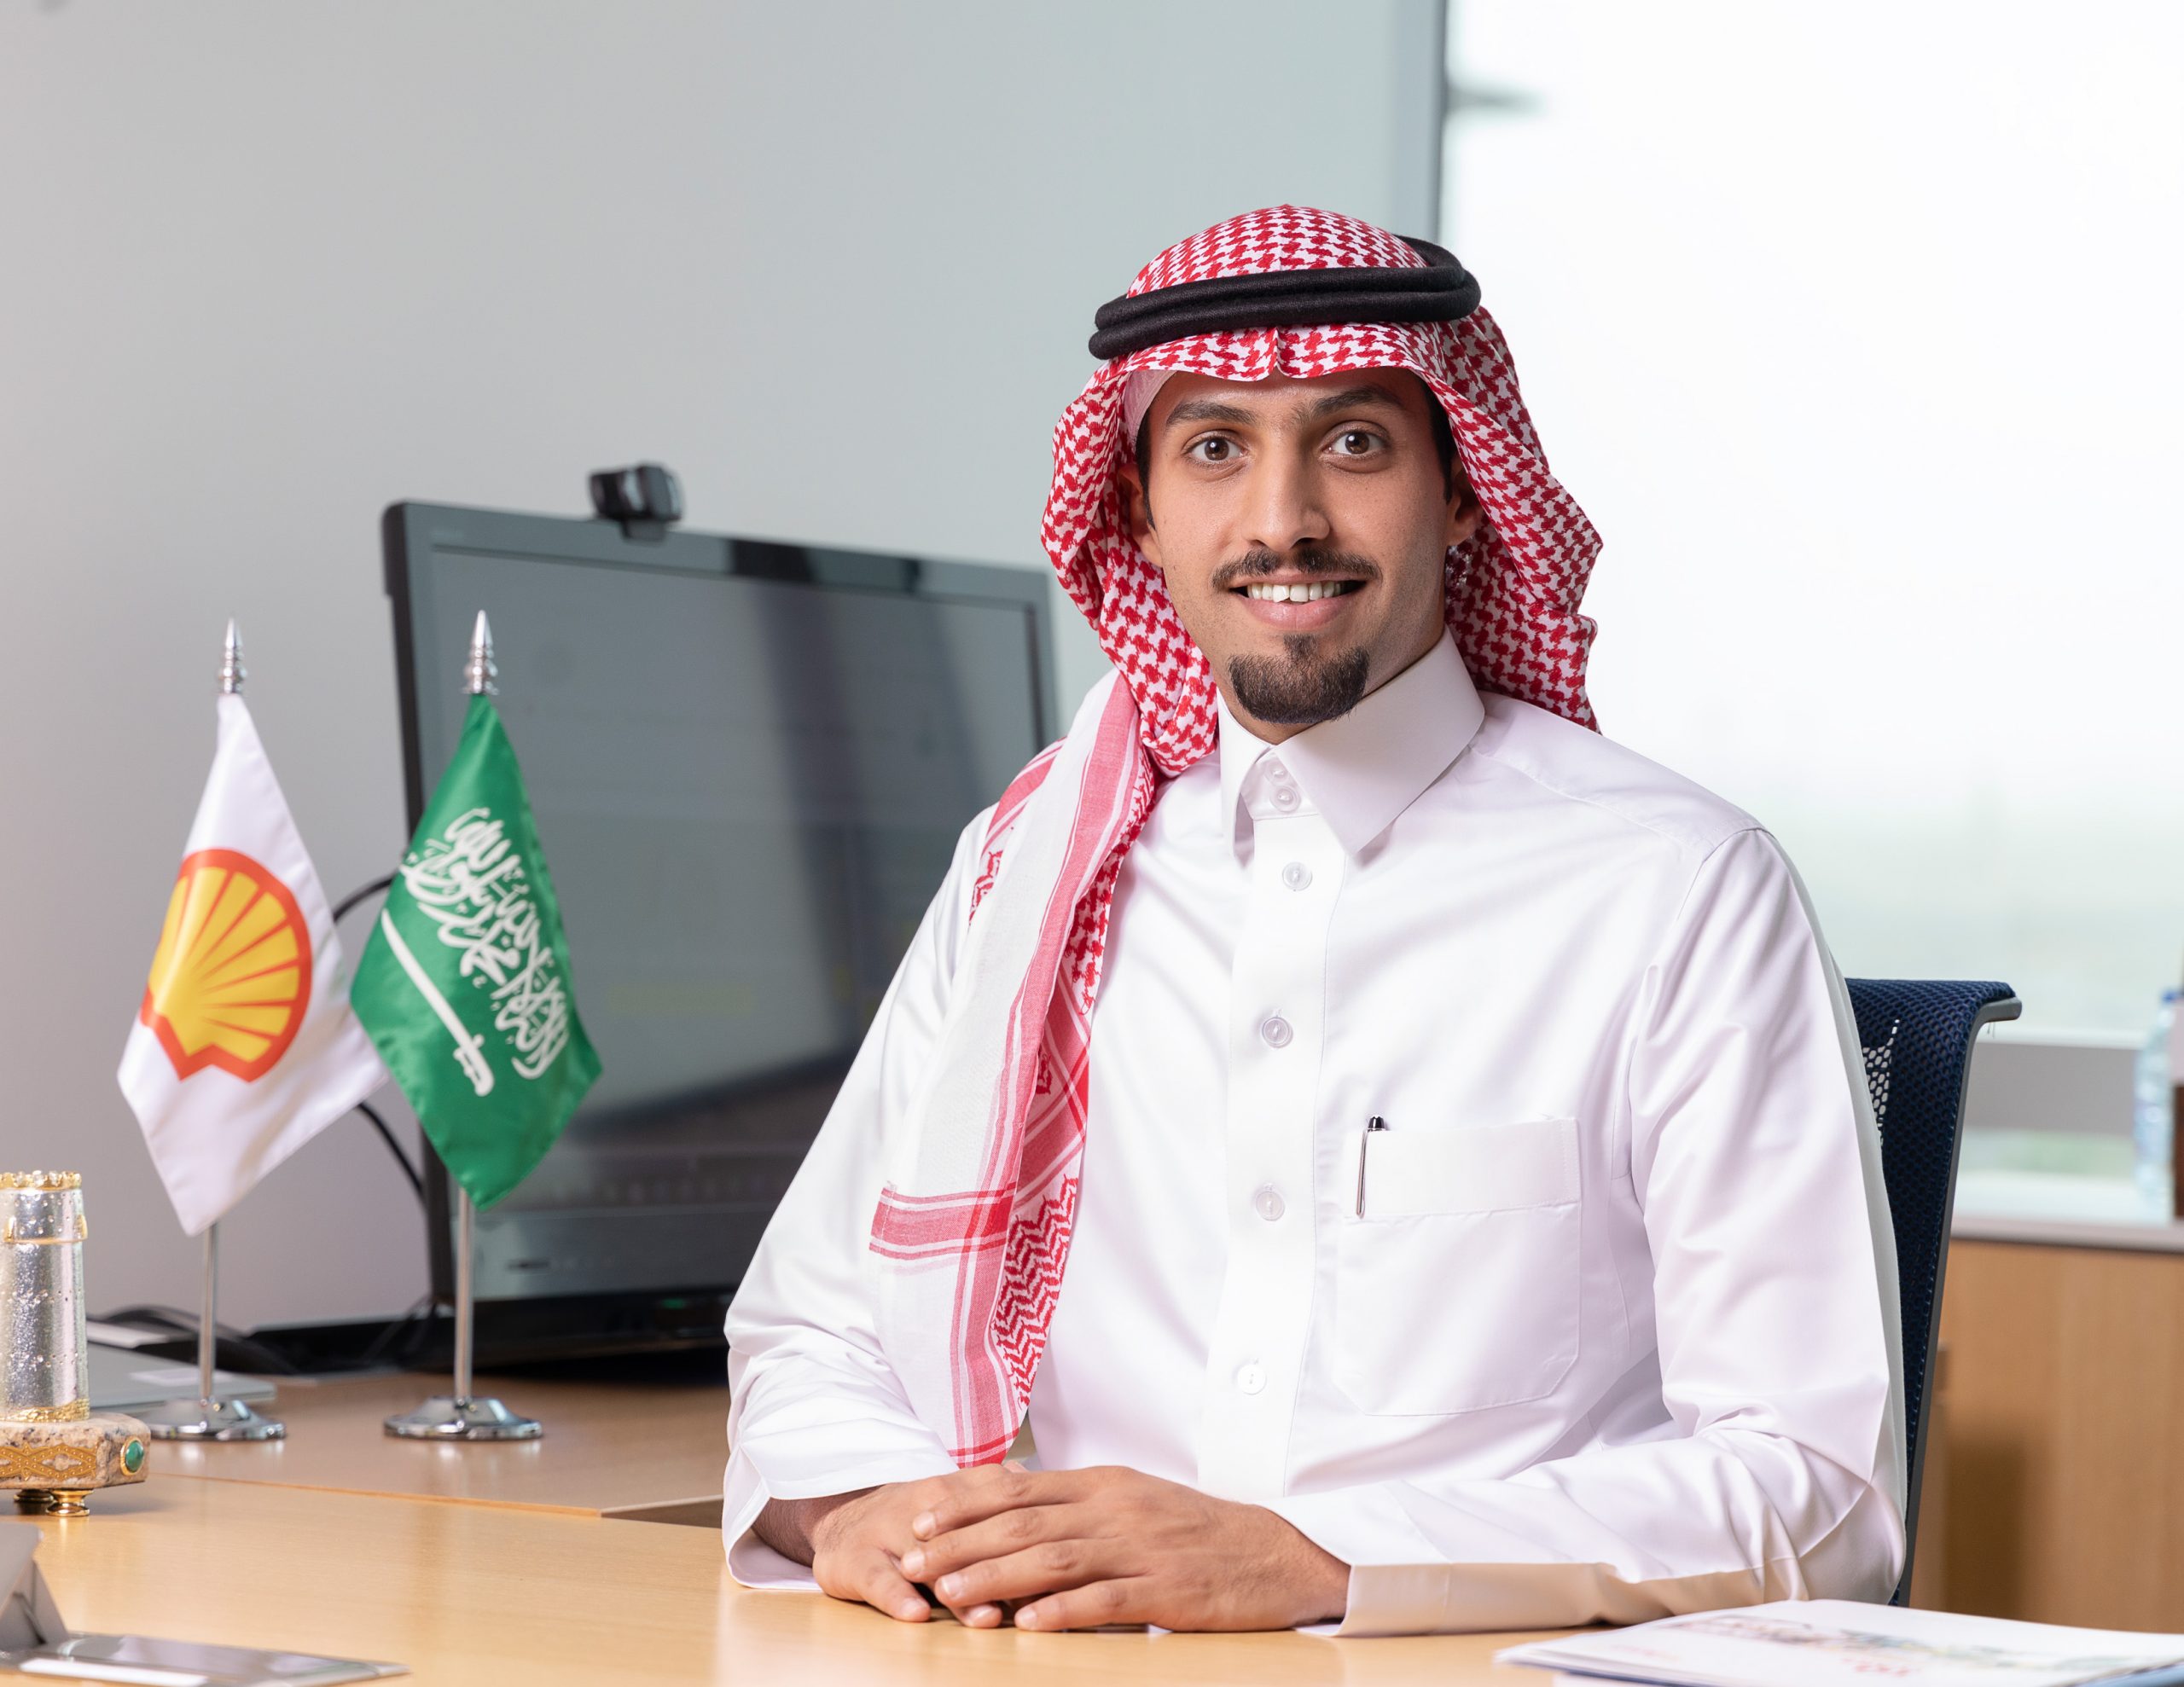 ChampionX appoints its first general manager for Saudi Arabia